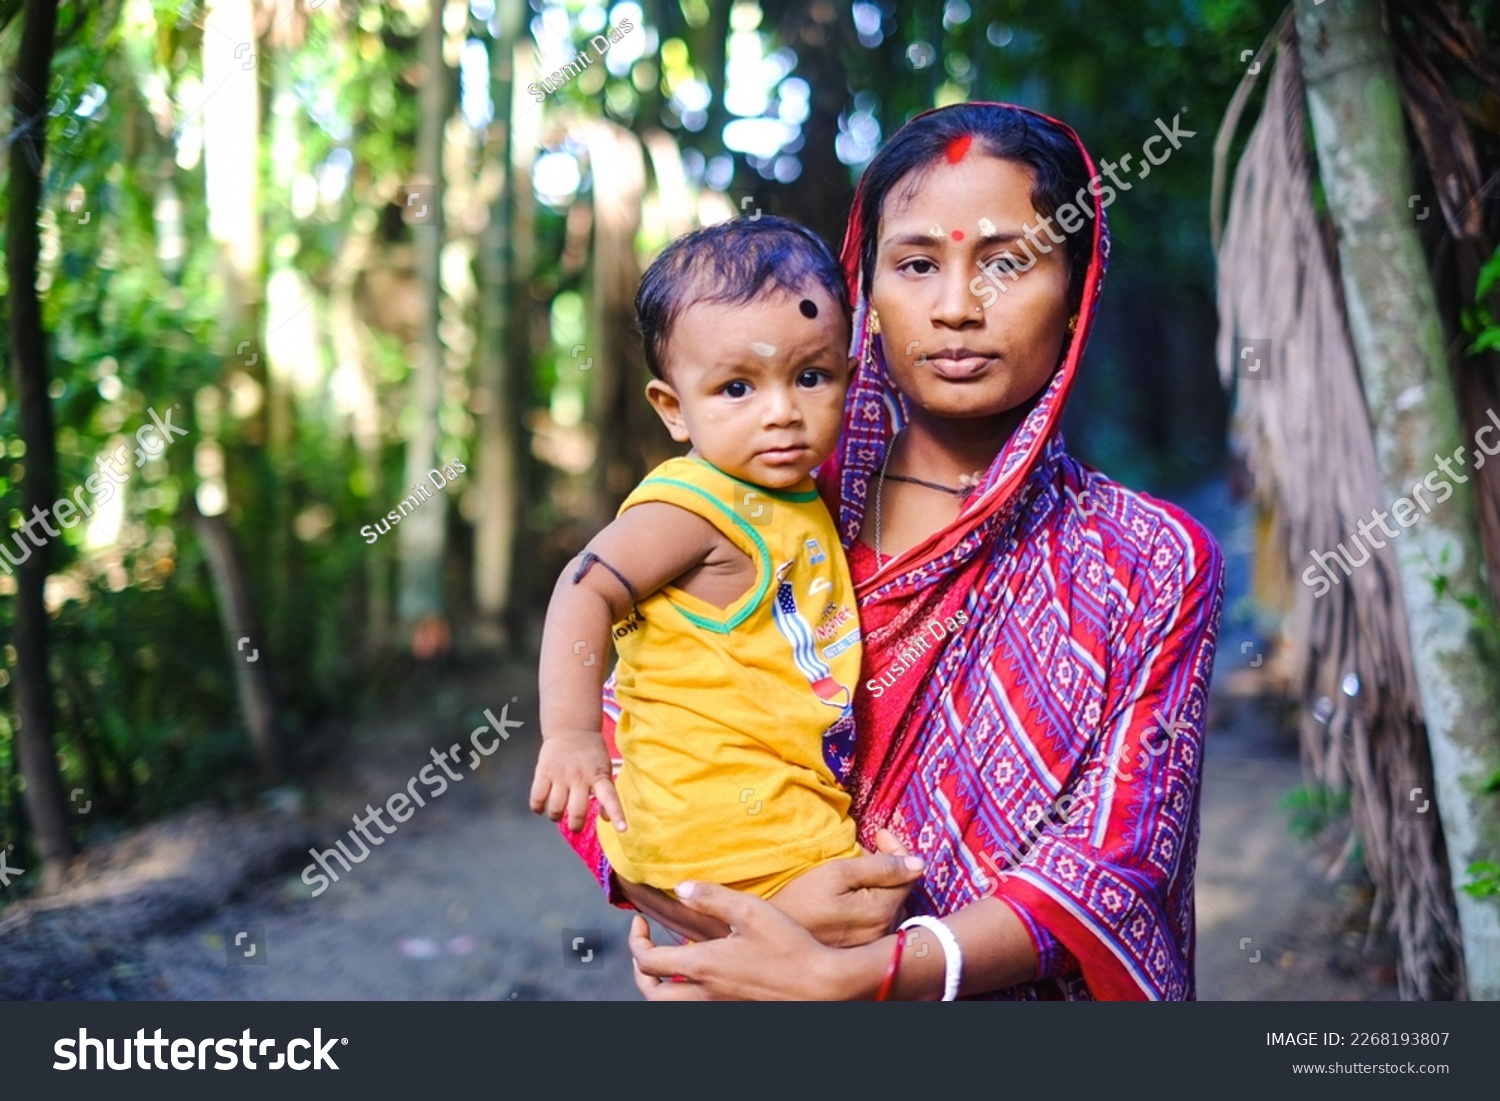 South asian hindu religious young mother holding her son, Child marriage is a problem, early maternity  #2268193807